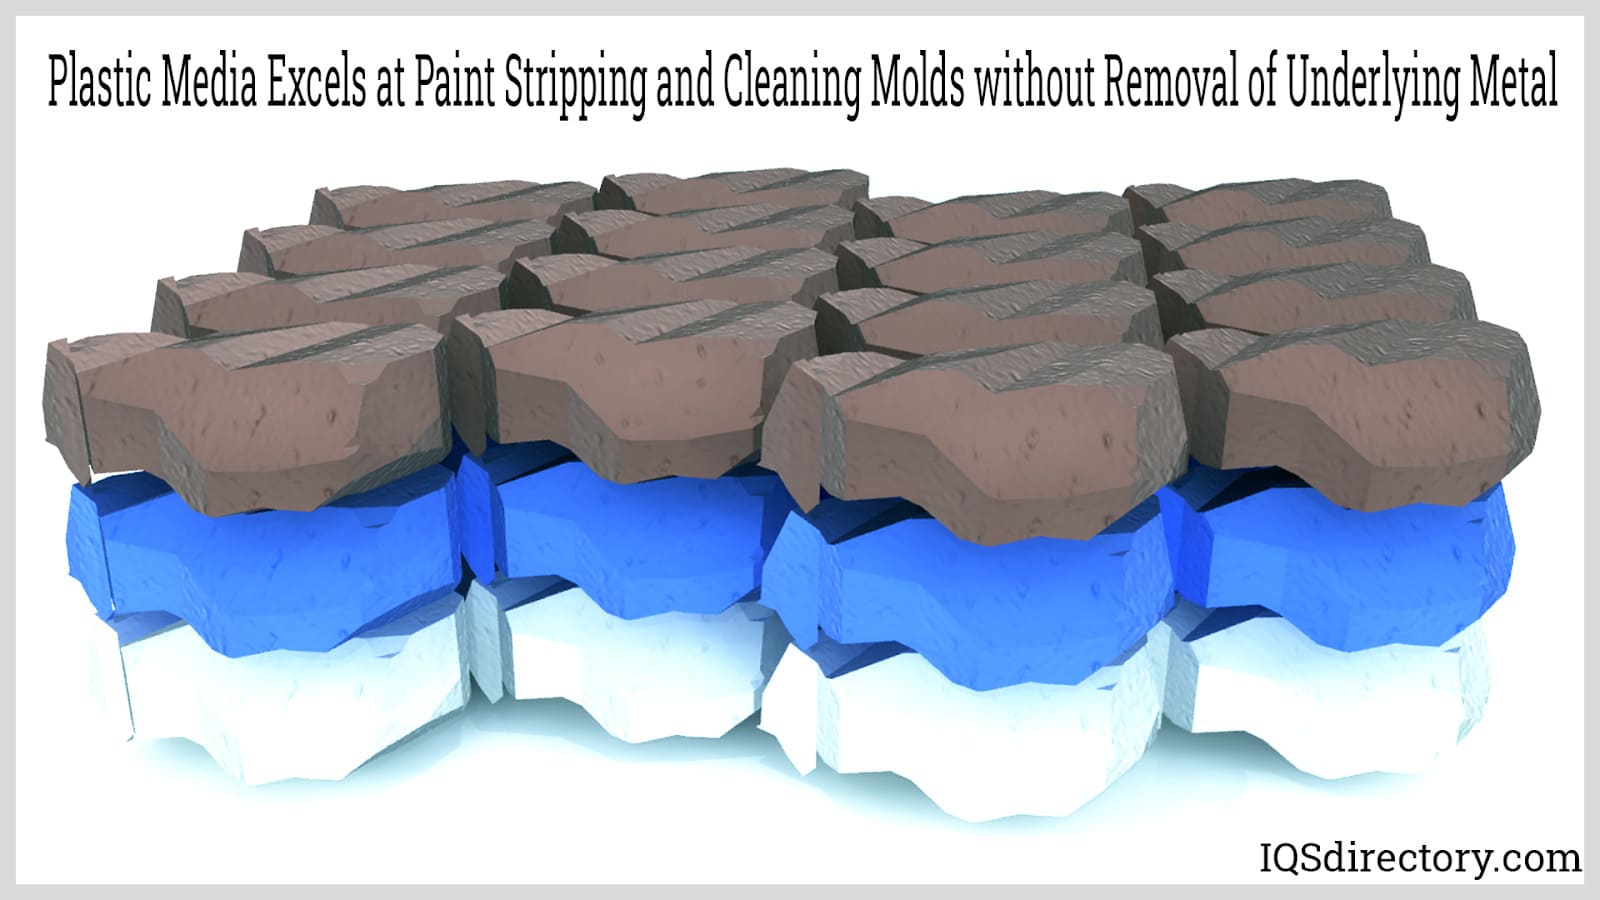 Plastic Media Excels at Paint Stripping and Cleaning Molds without Removal of Underlying Metal